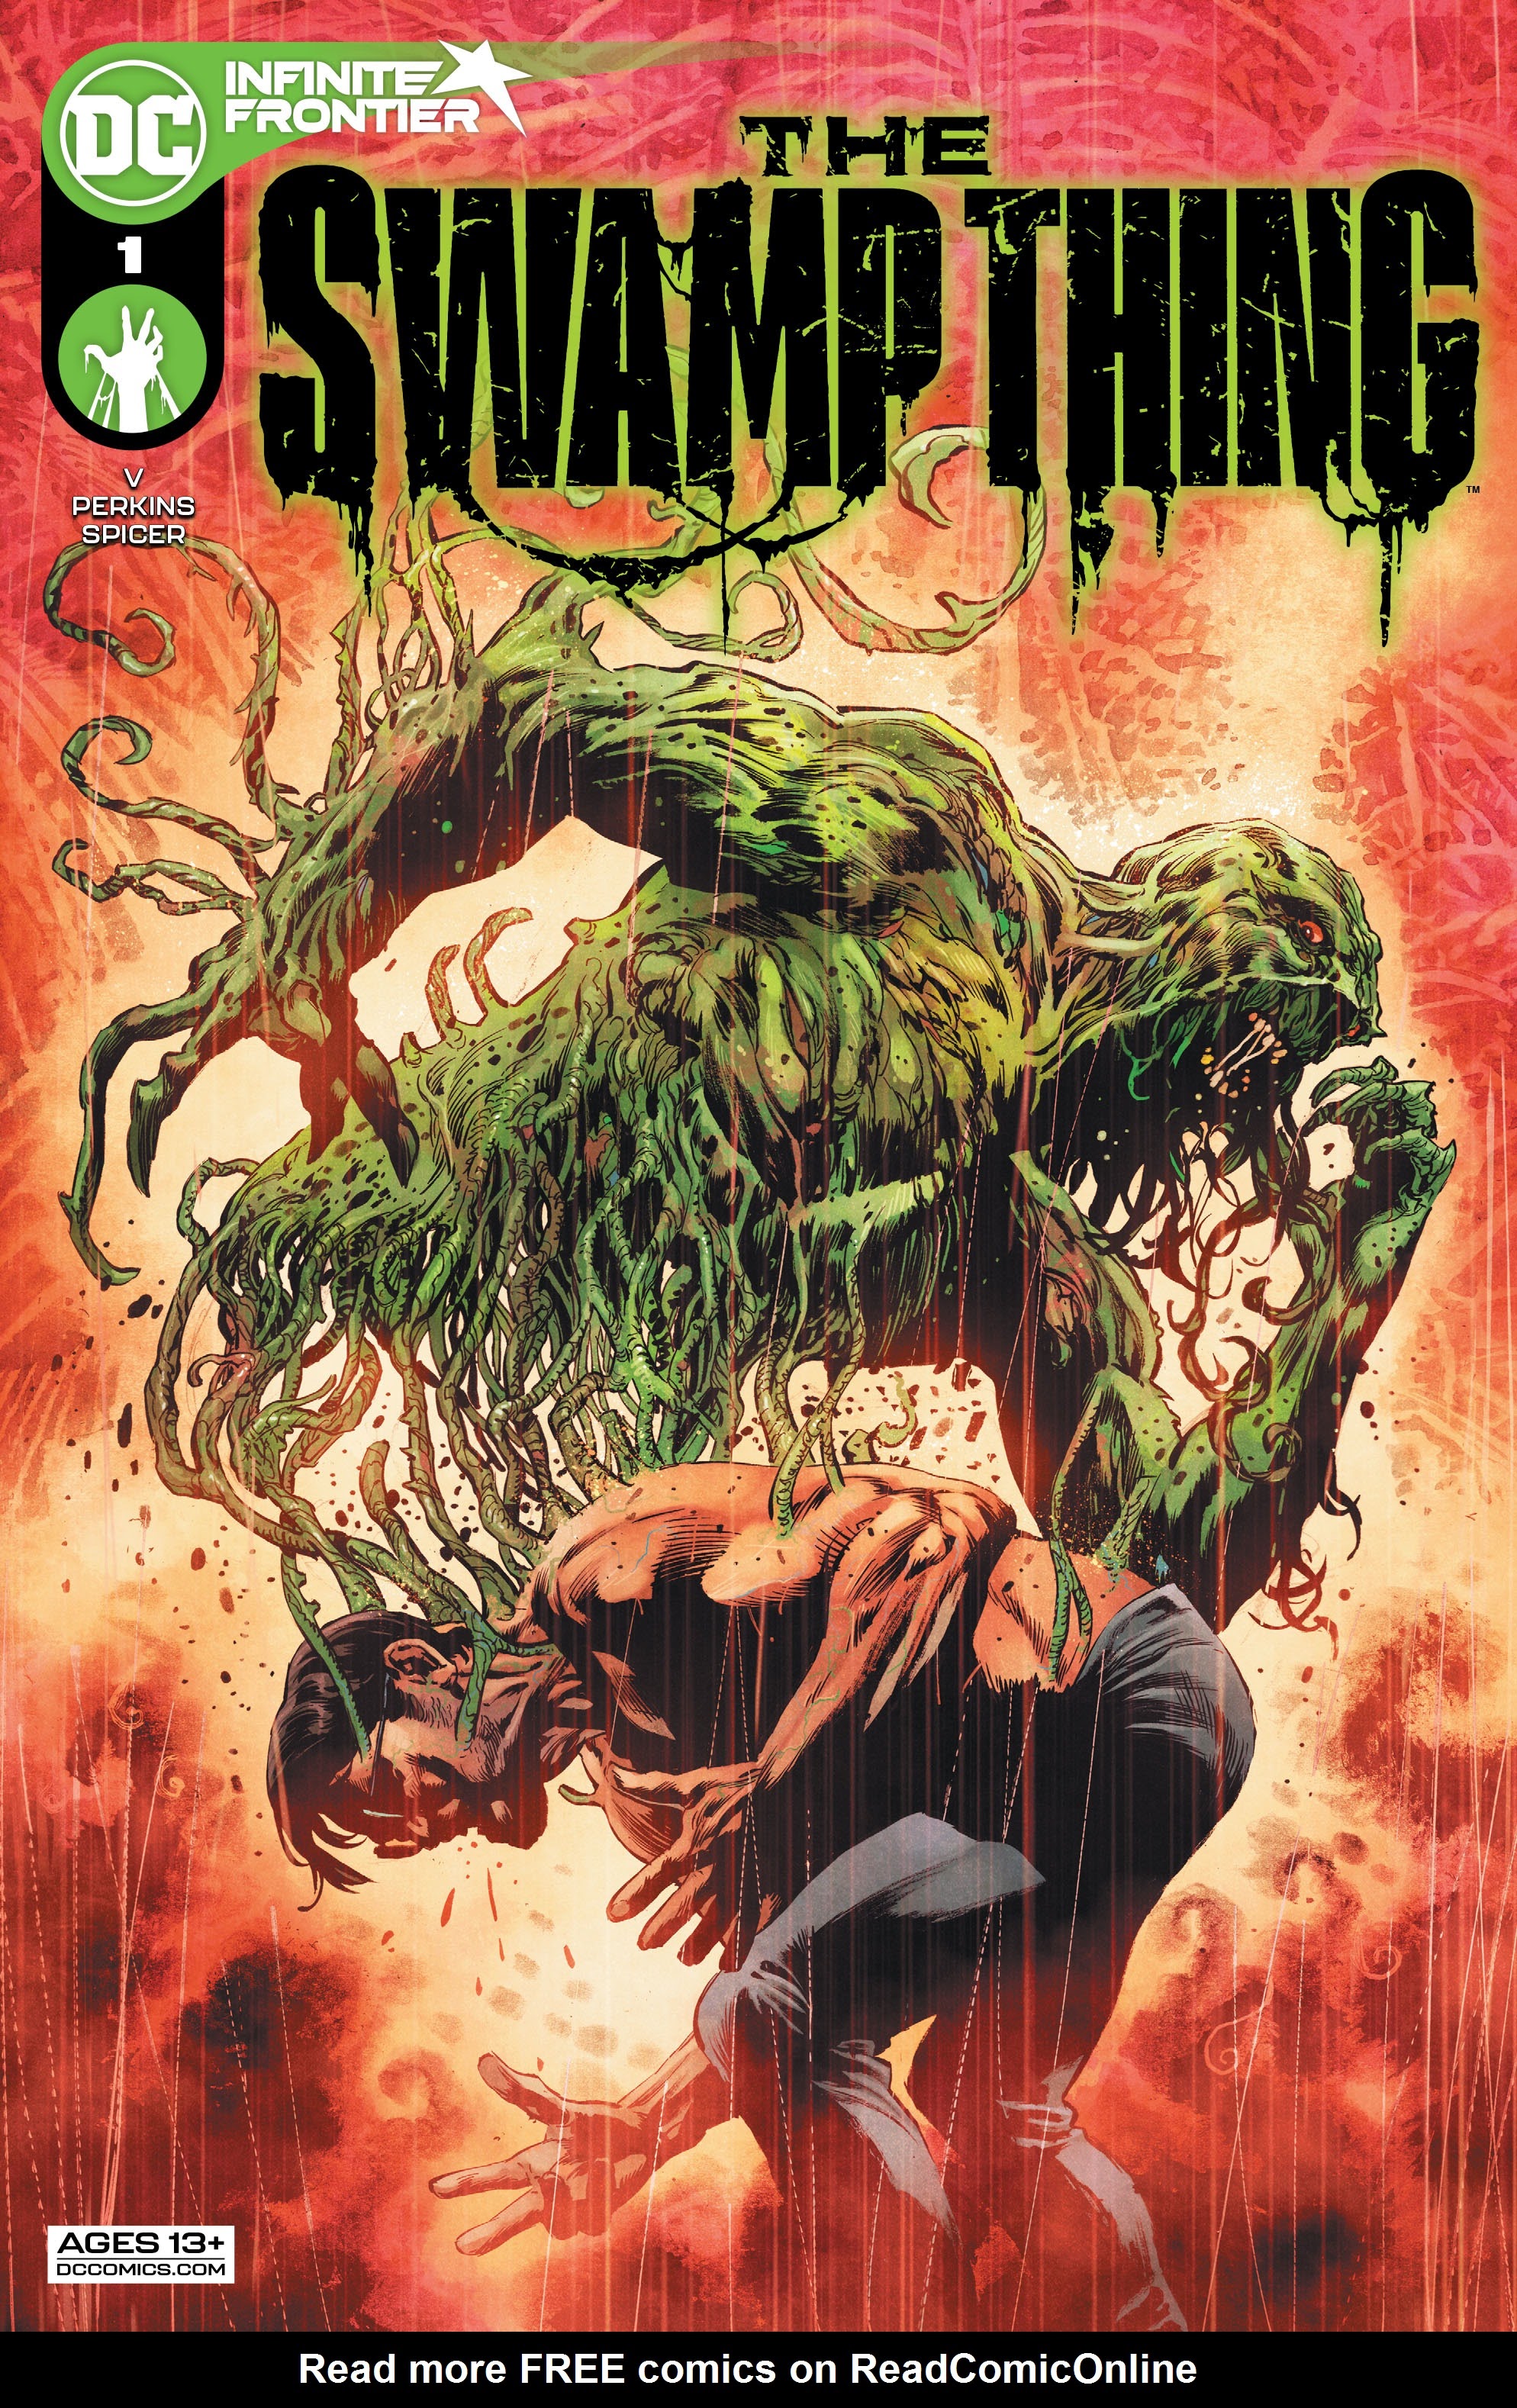 Read online The Swamp Thing comic -  Issue #1 - 1